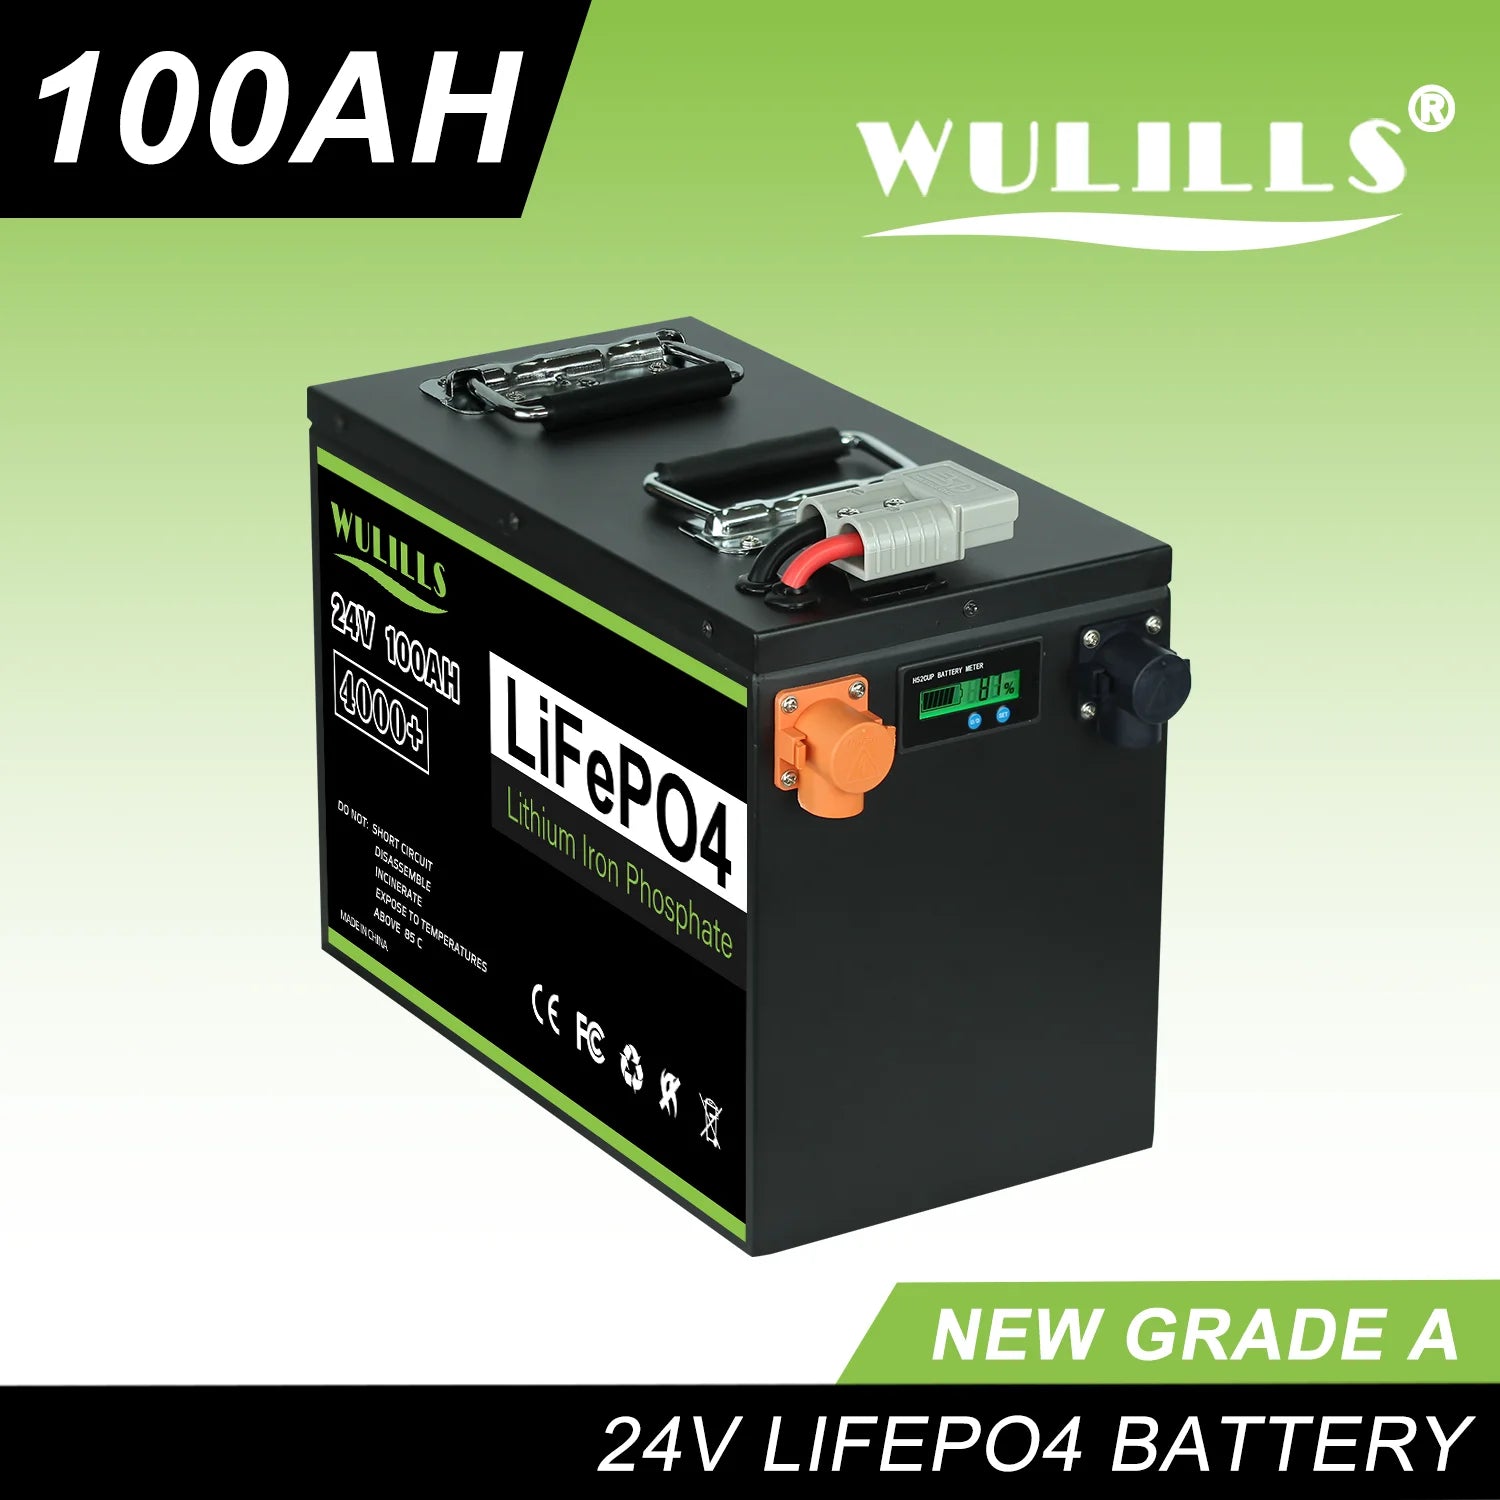 Grade A LiFePO4 Battery for home solar power with built-in BMS and capacities from 100Ah to 400Ah.